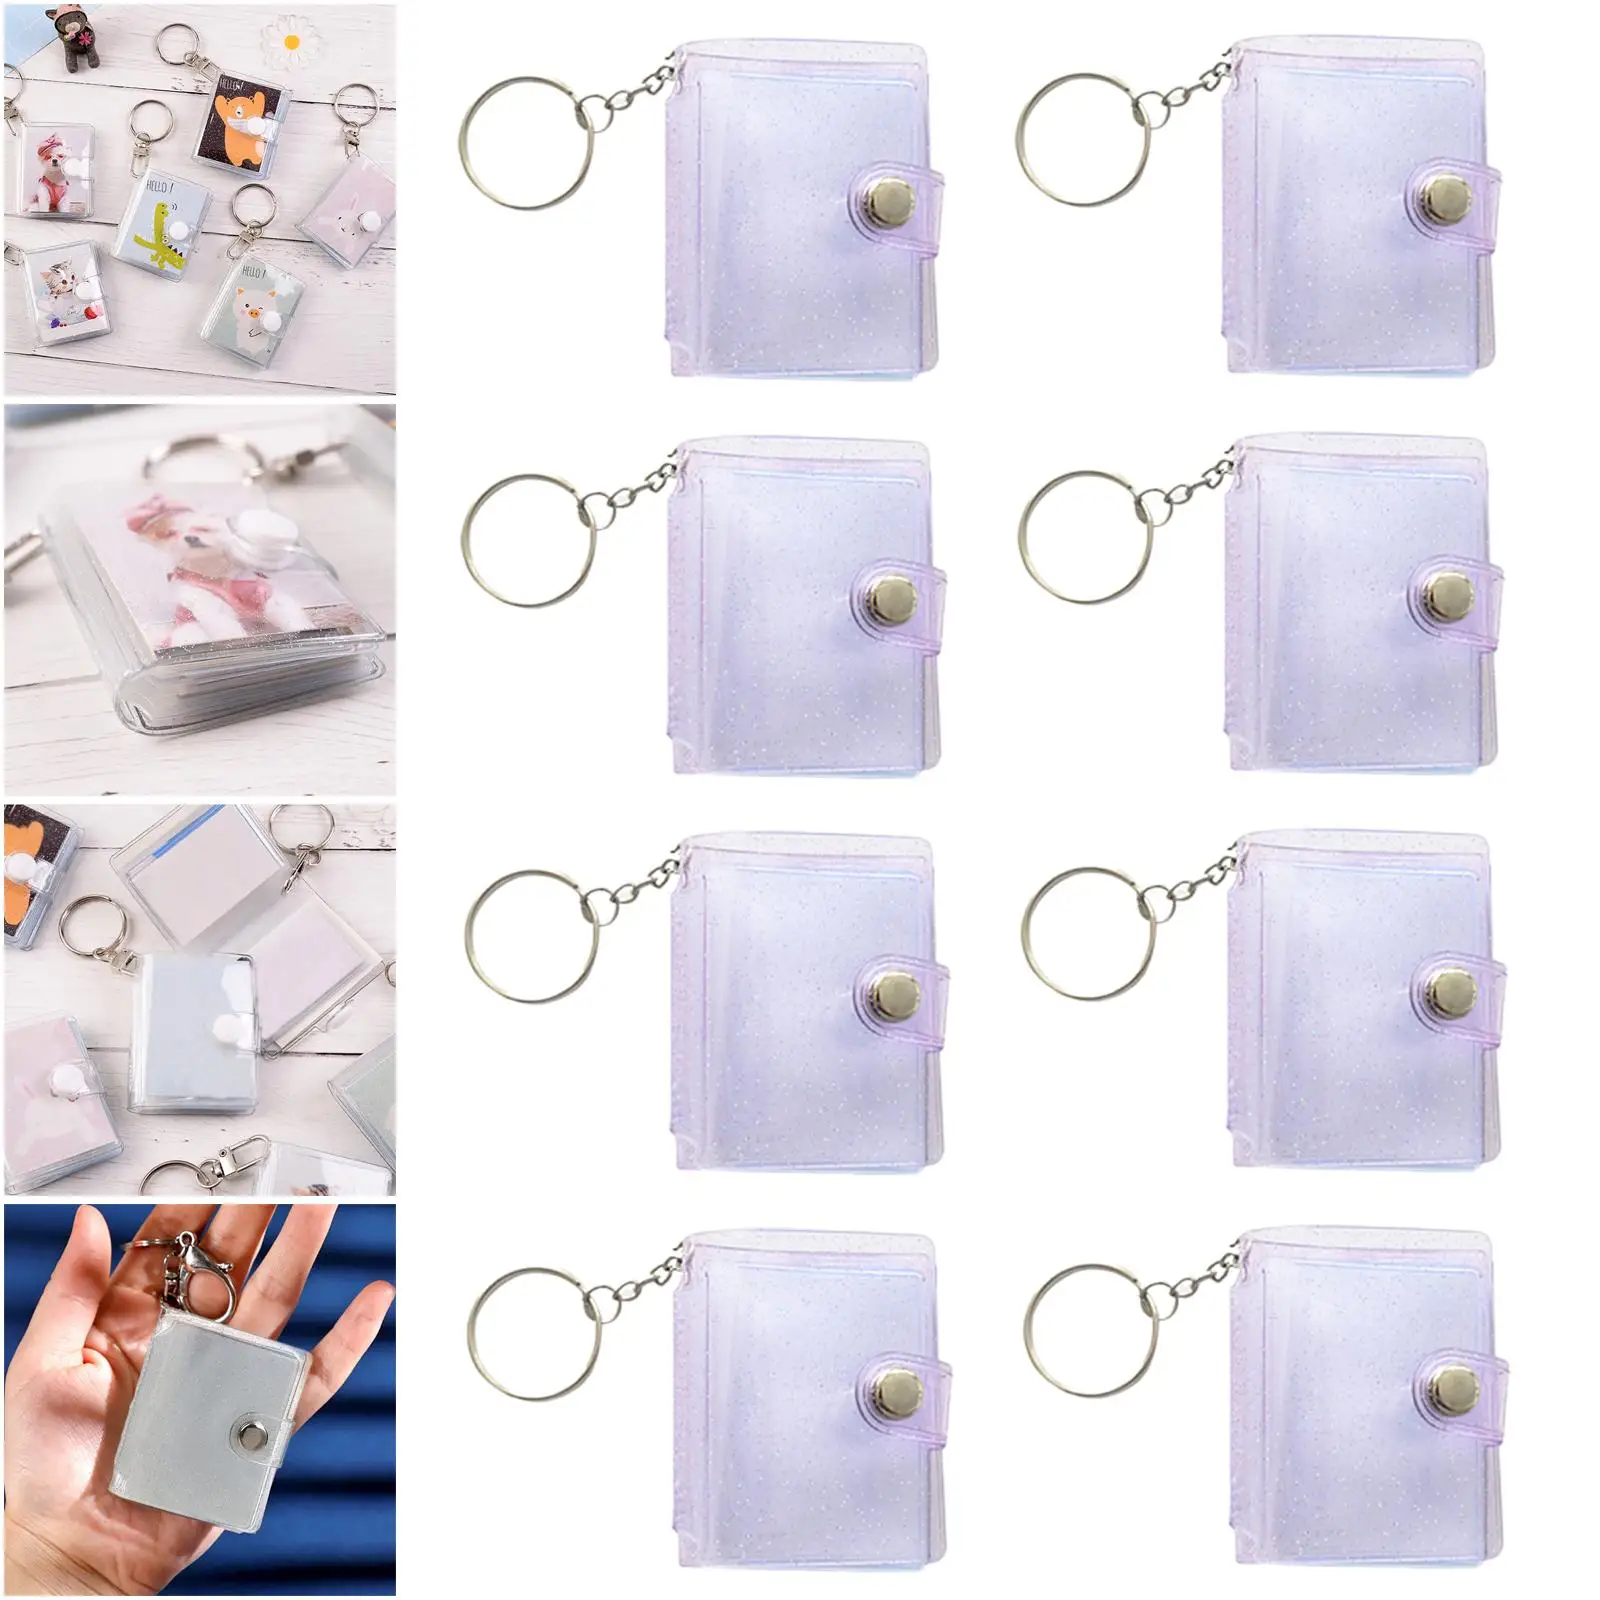 Mini Album Binder Picture Storage, Card Business Keychain Card Cover Hanging Organizer for Anniversary Memory